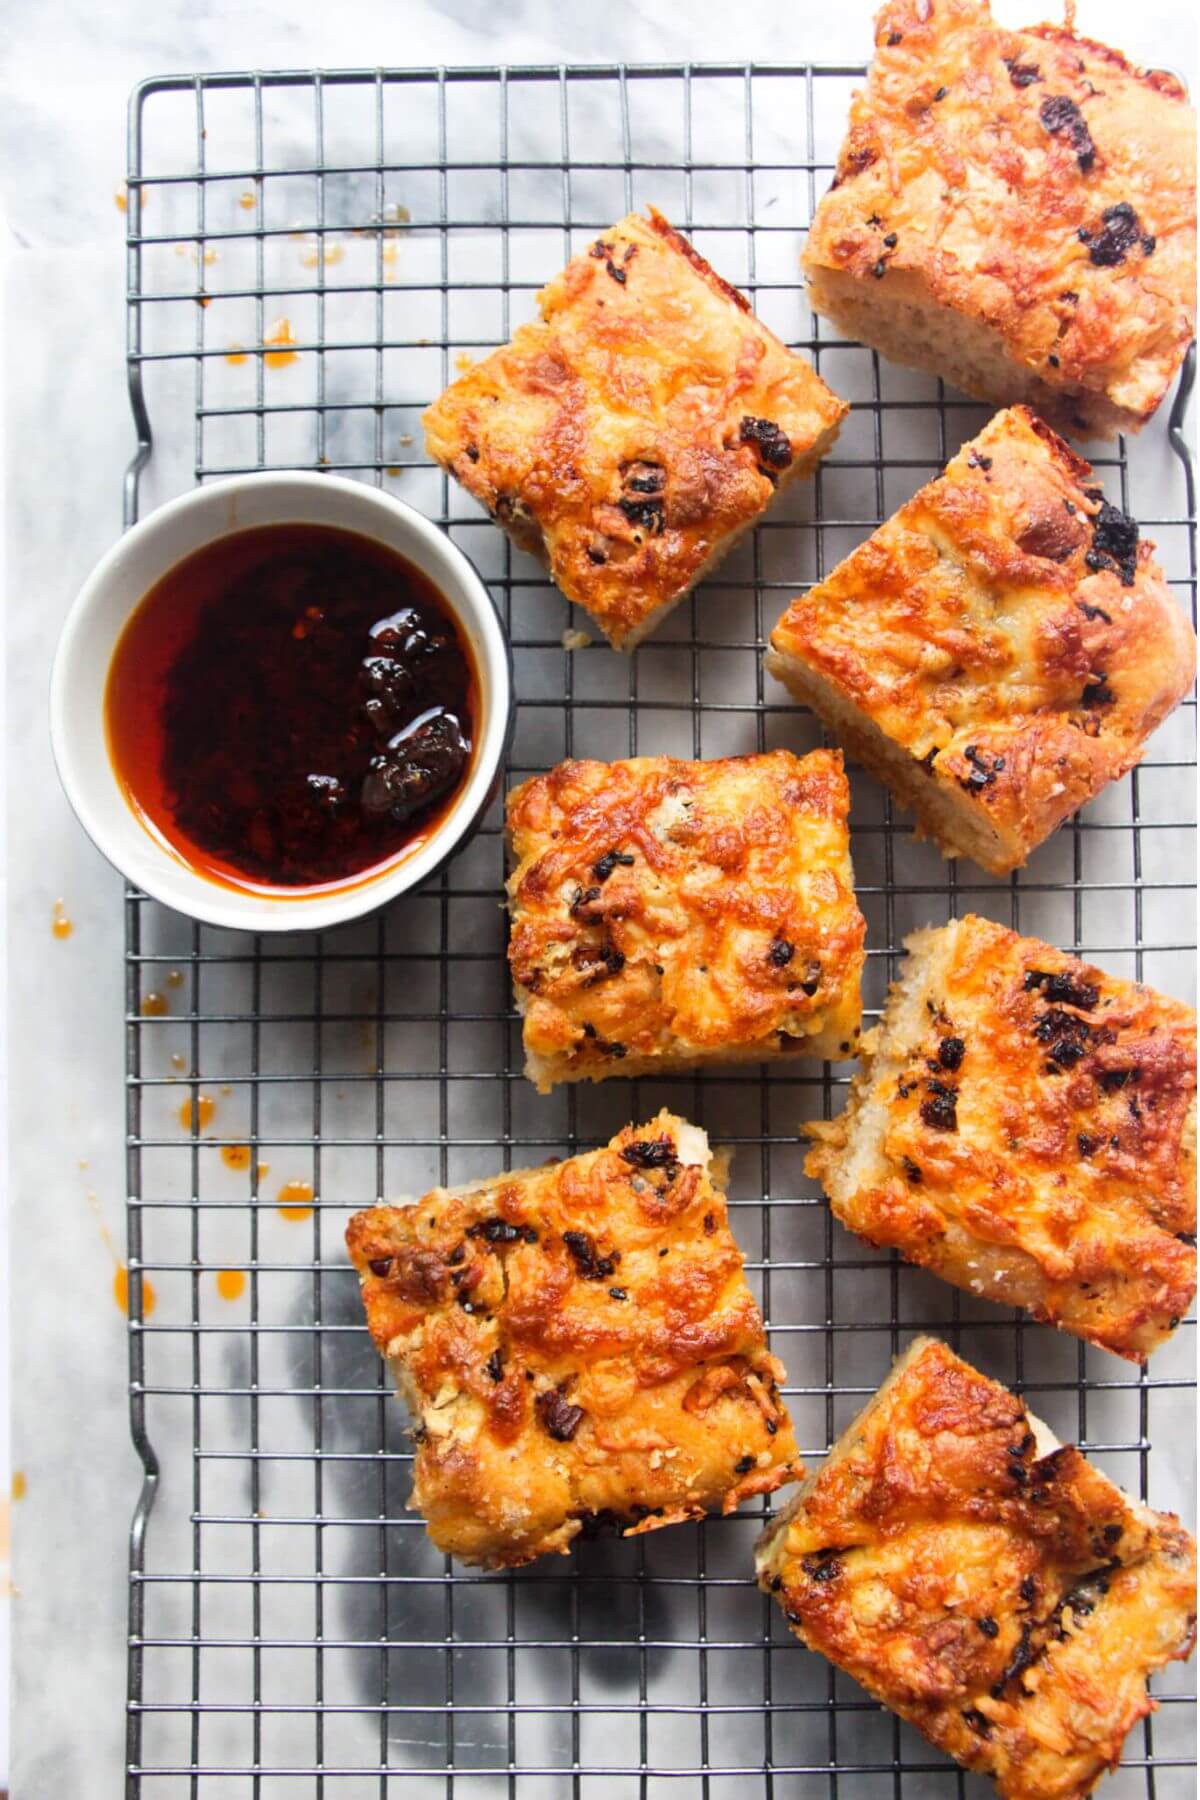 7 pieces of focaccia on a wire rack with a small bowl of chilli oil on the side.